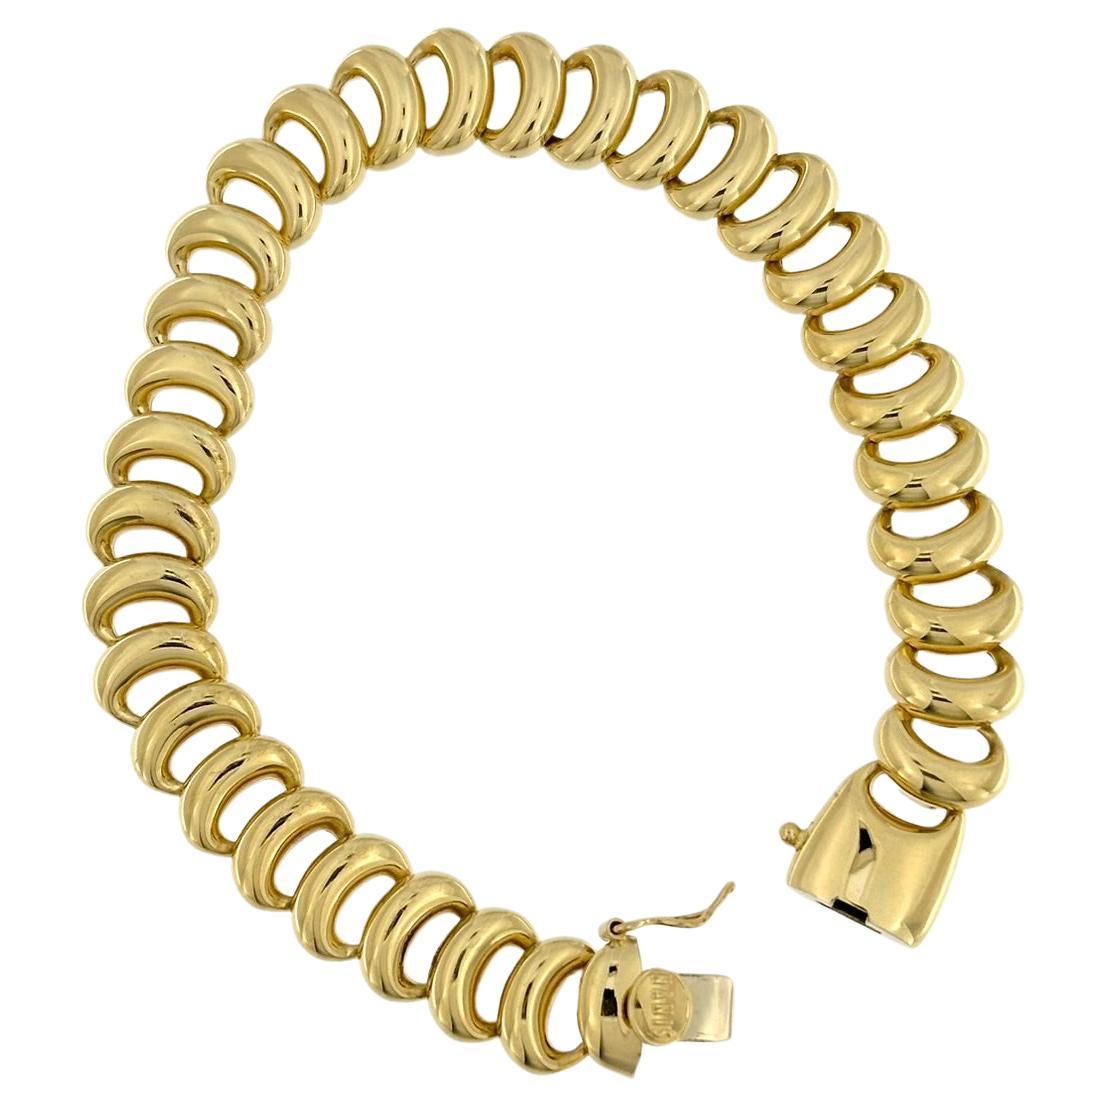 Yellow Gold Flexible Bracelet signed by Nanis